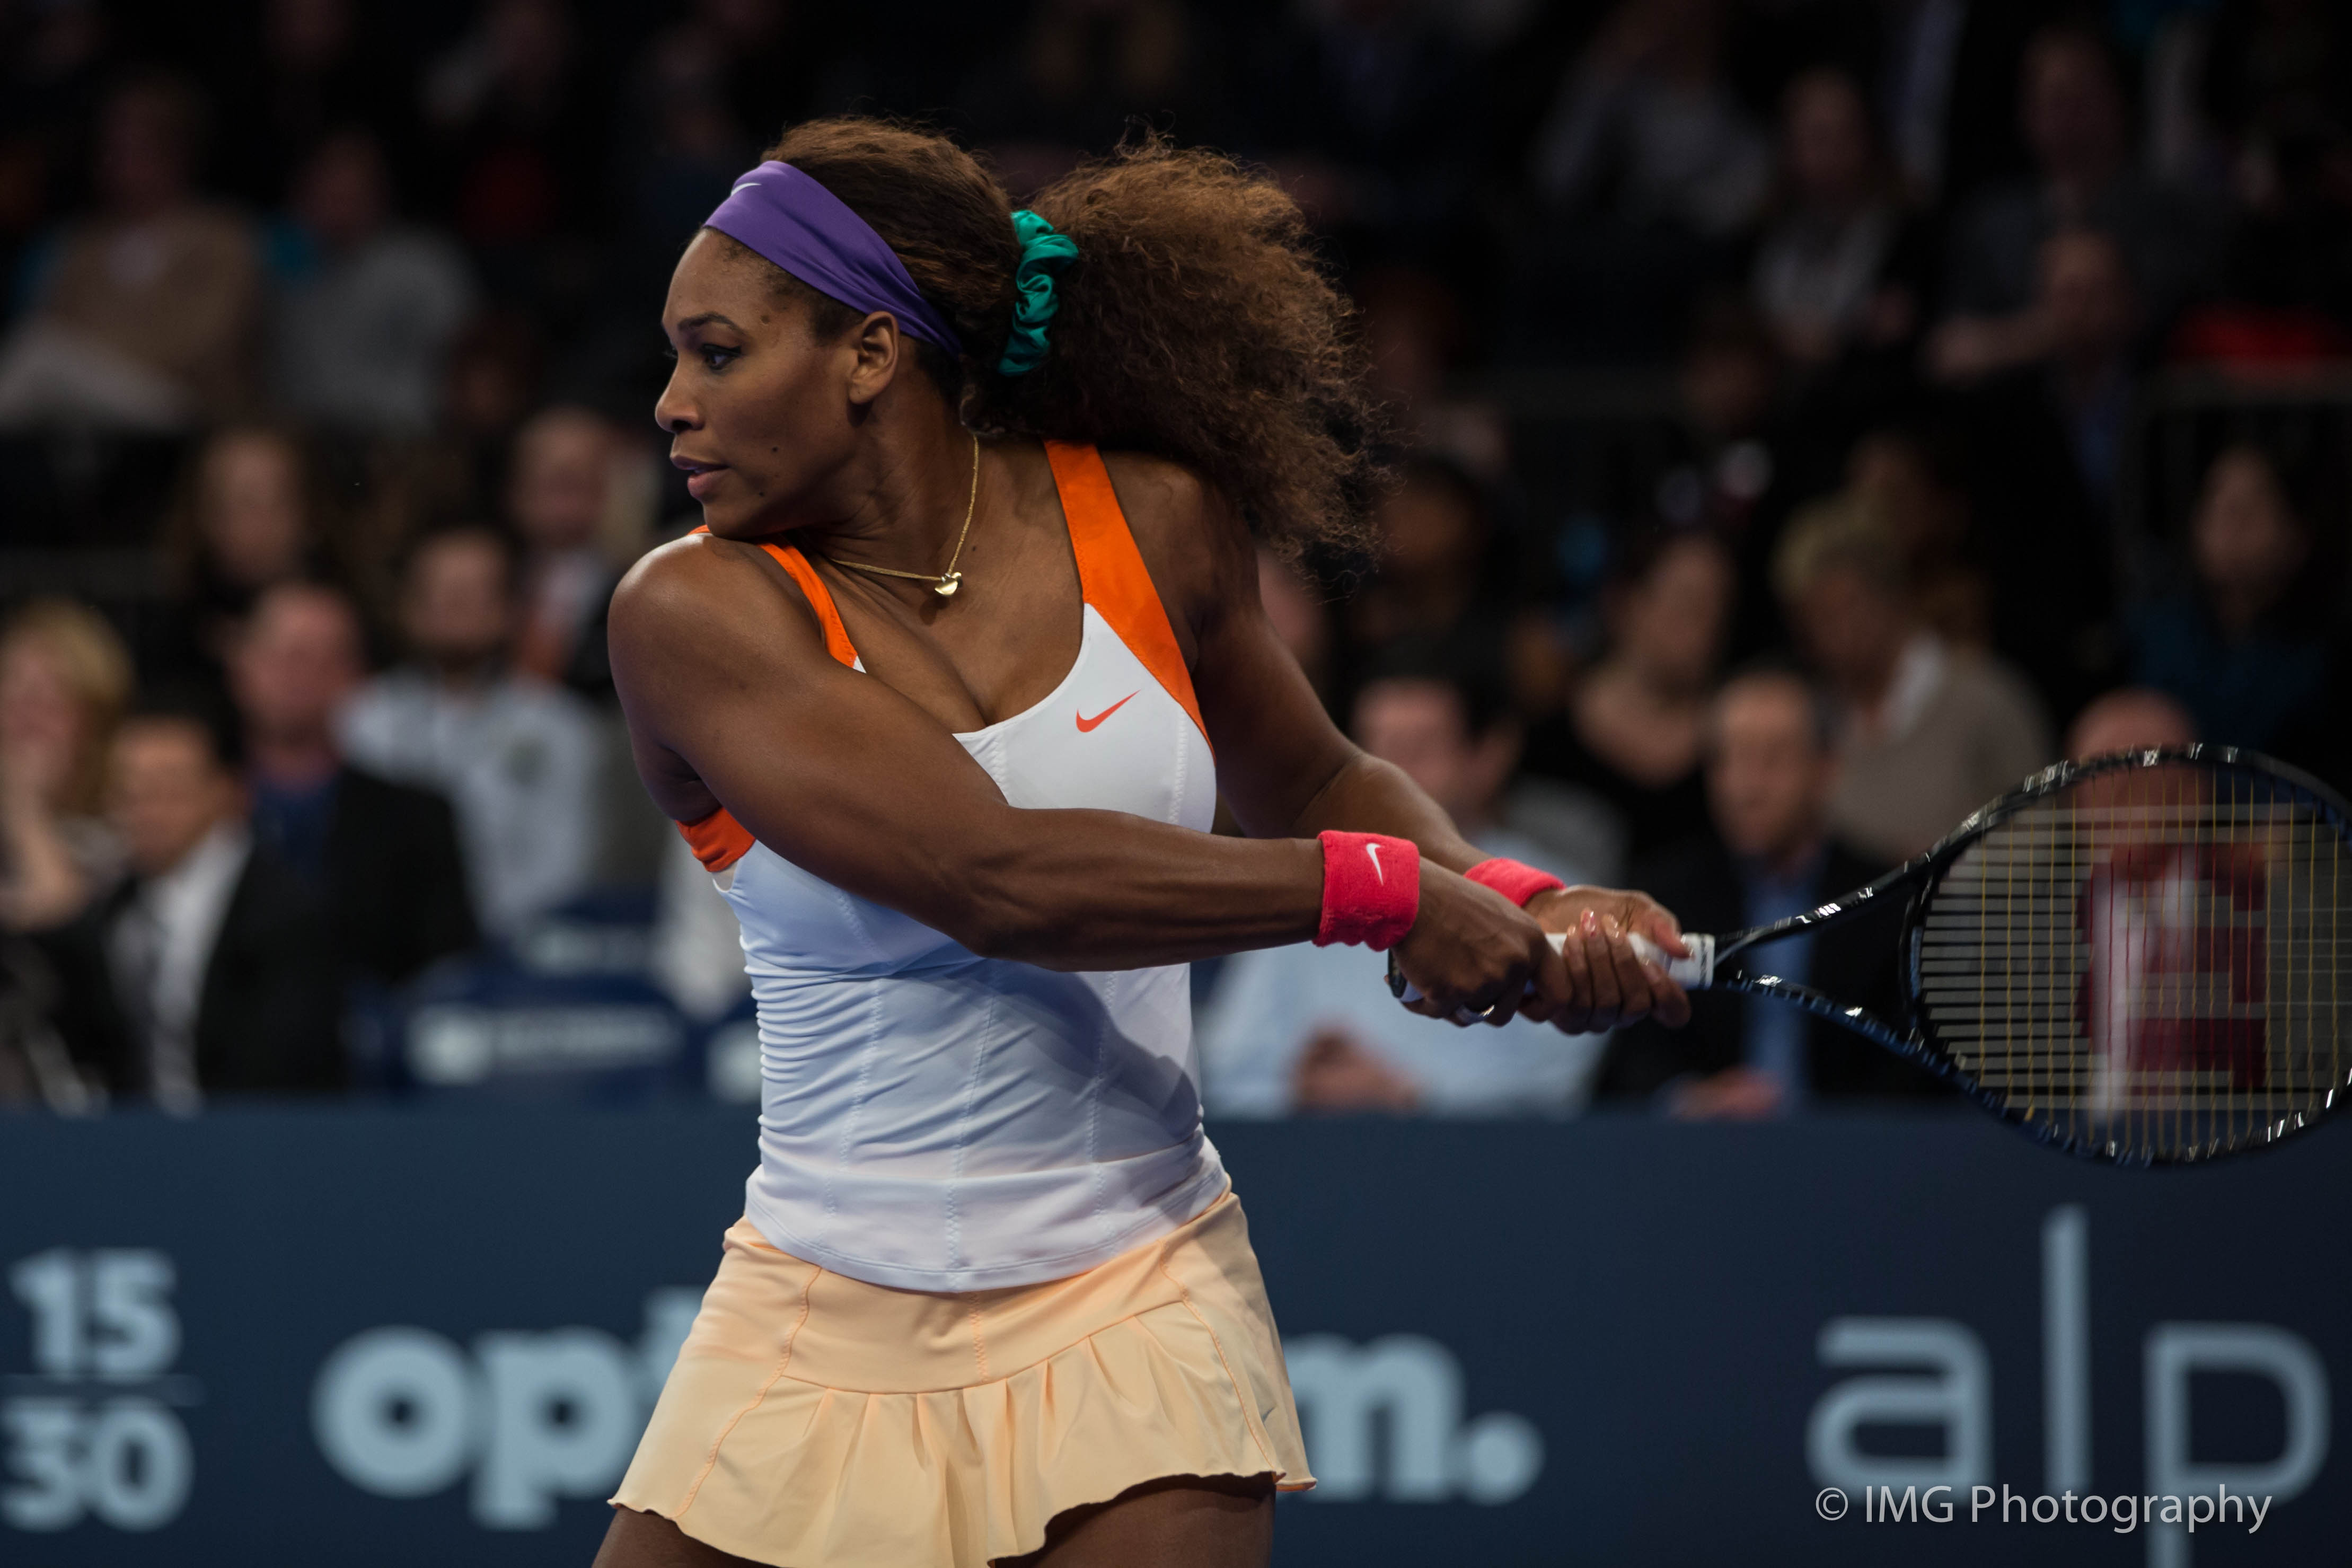 Serena Goes Female Empowerment in Ad | The Fairfield